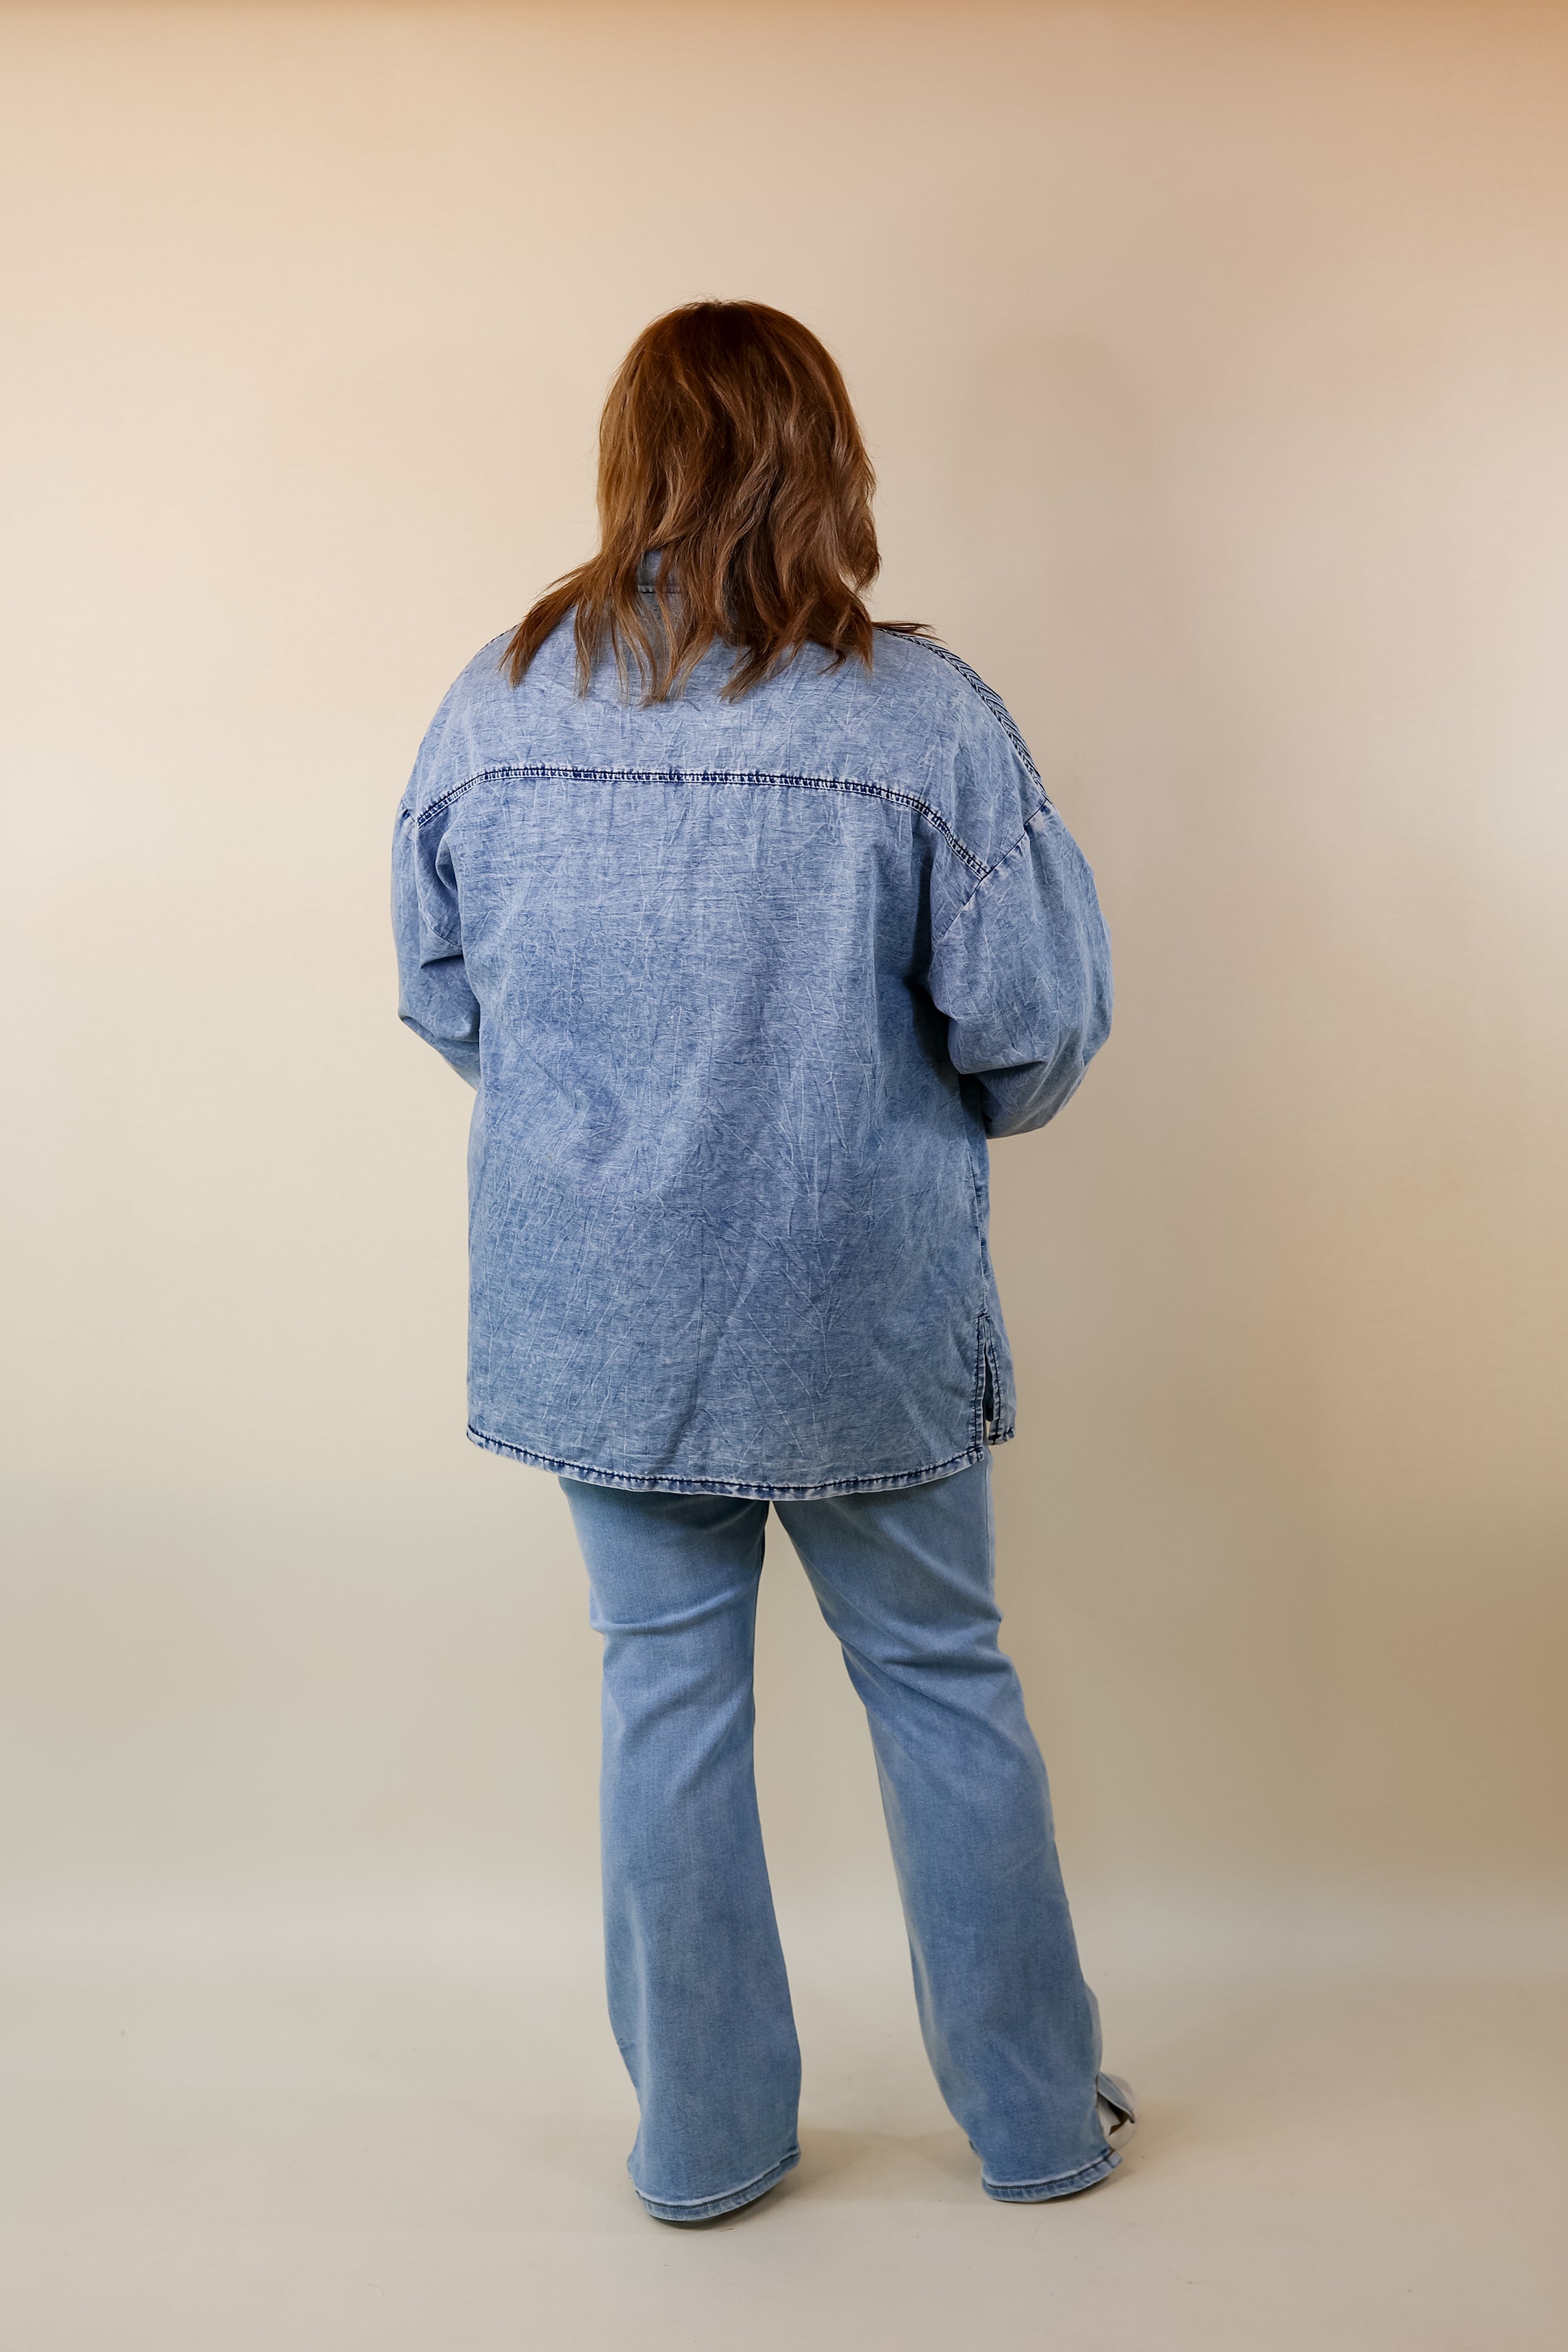 Dawn Of Time Pleated Button Up Denim Top - Giddy Up Glamour Boutique